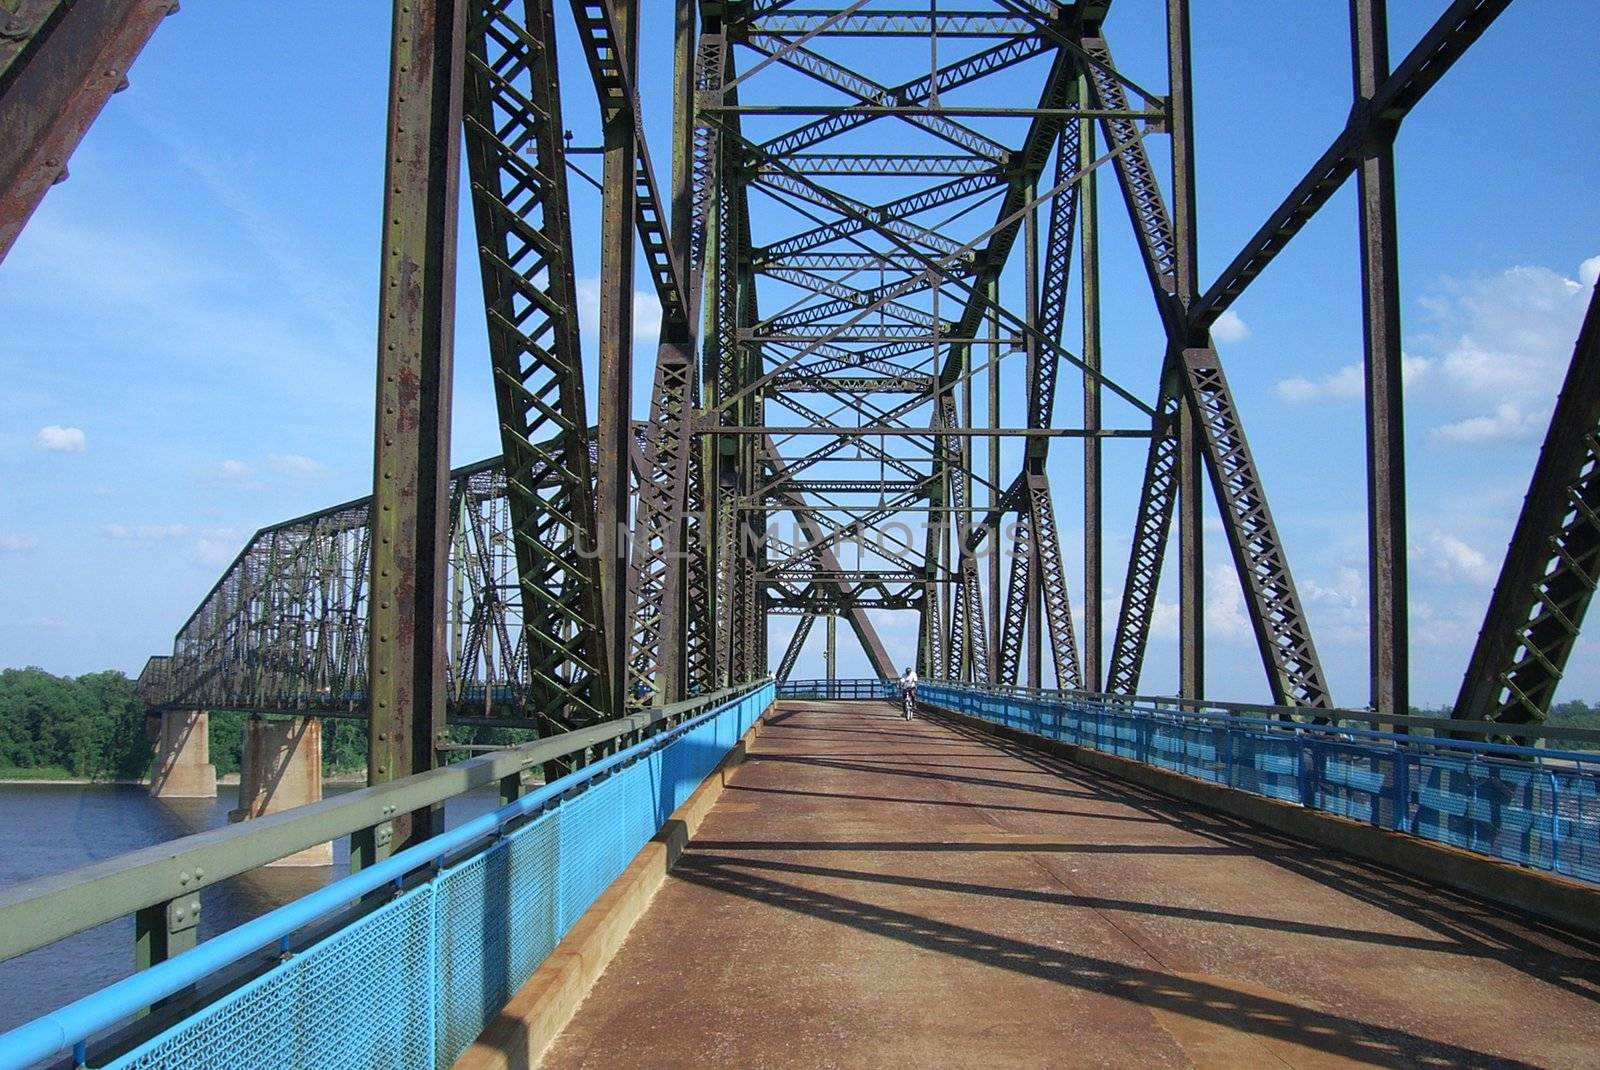 Route 66 crossing of Mississippi River, between Illinois and Missouri.